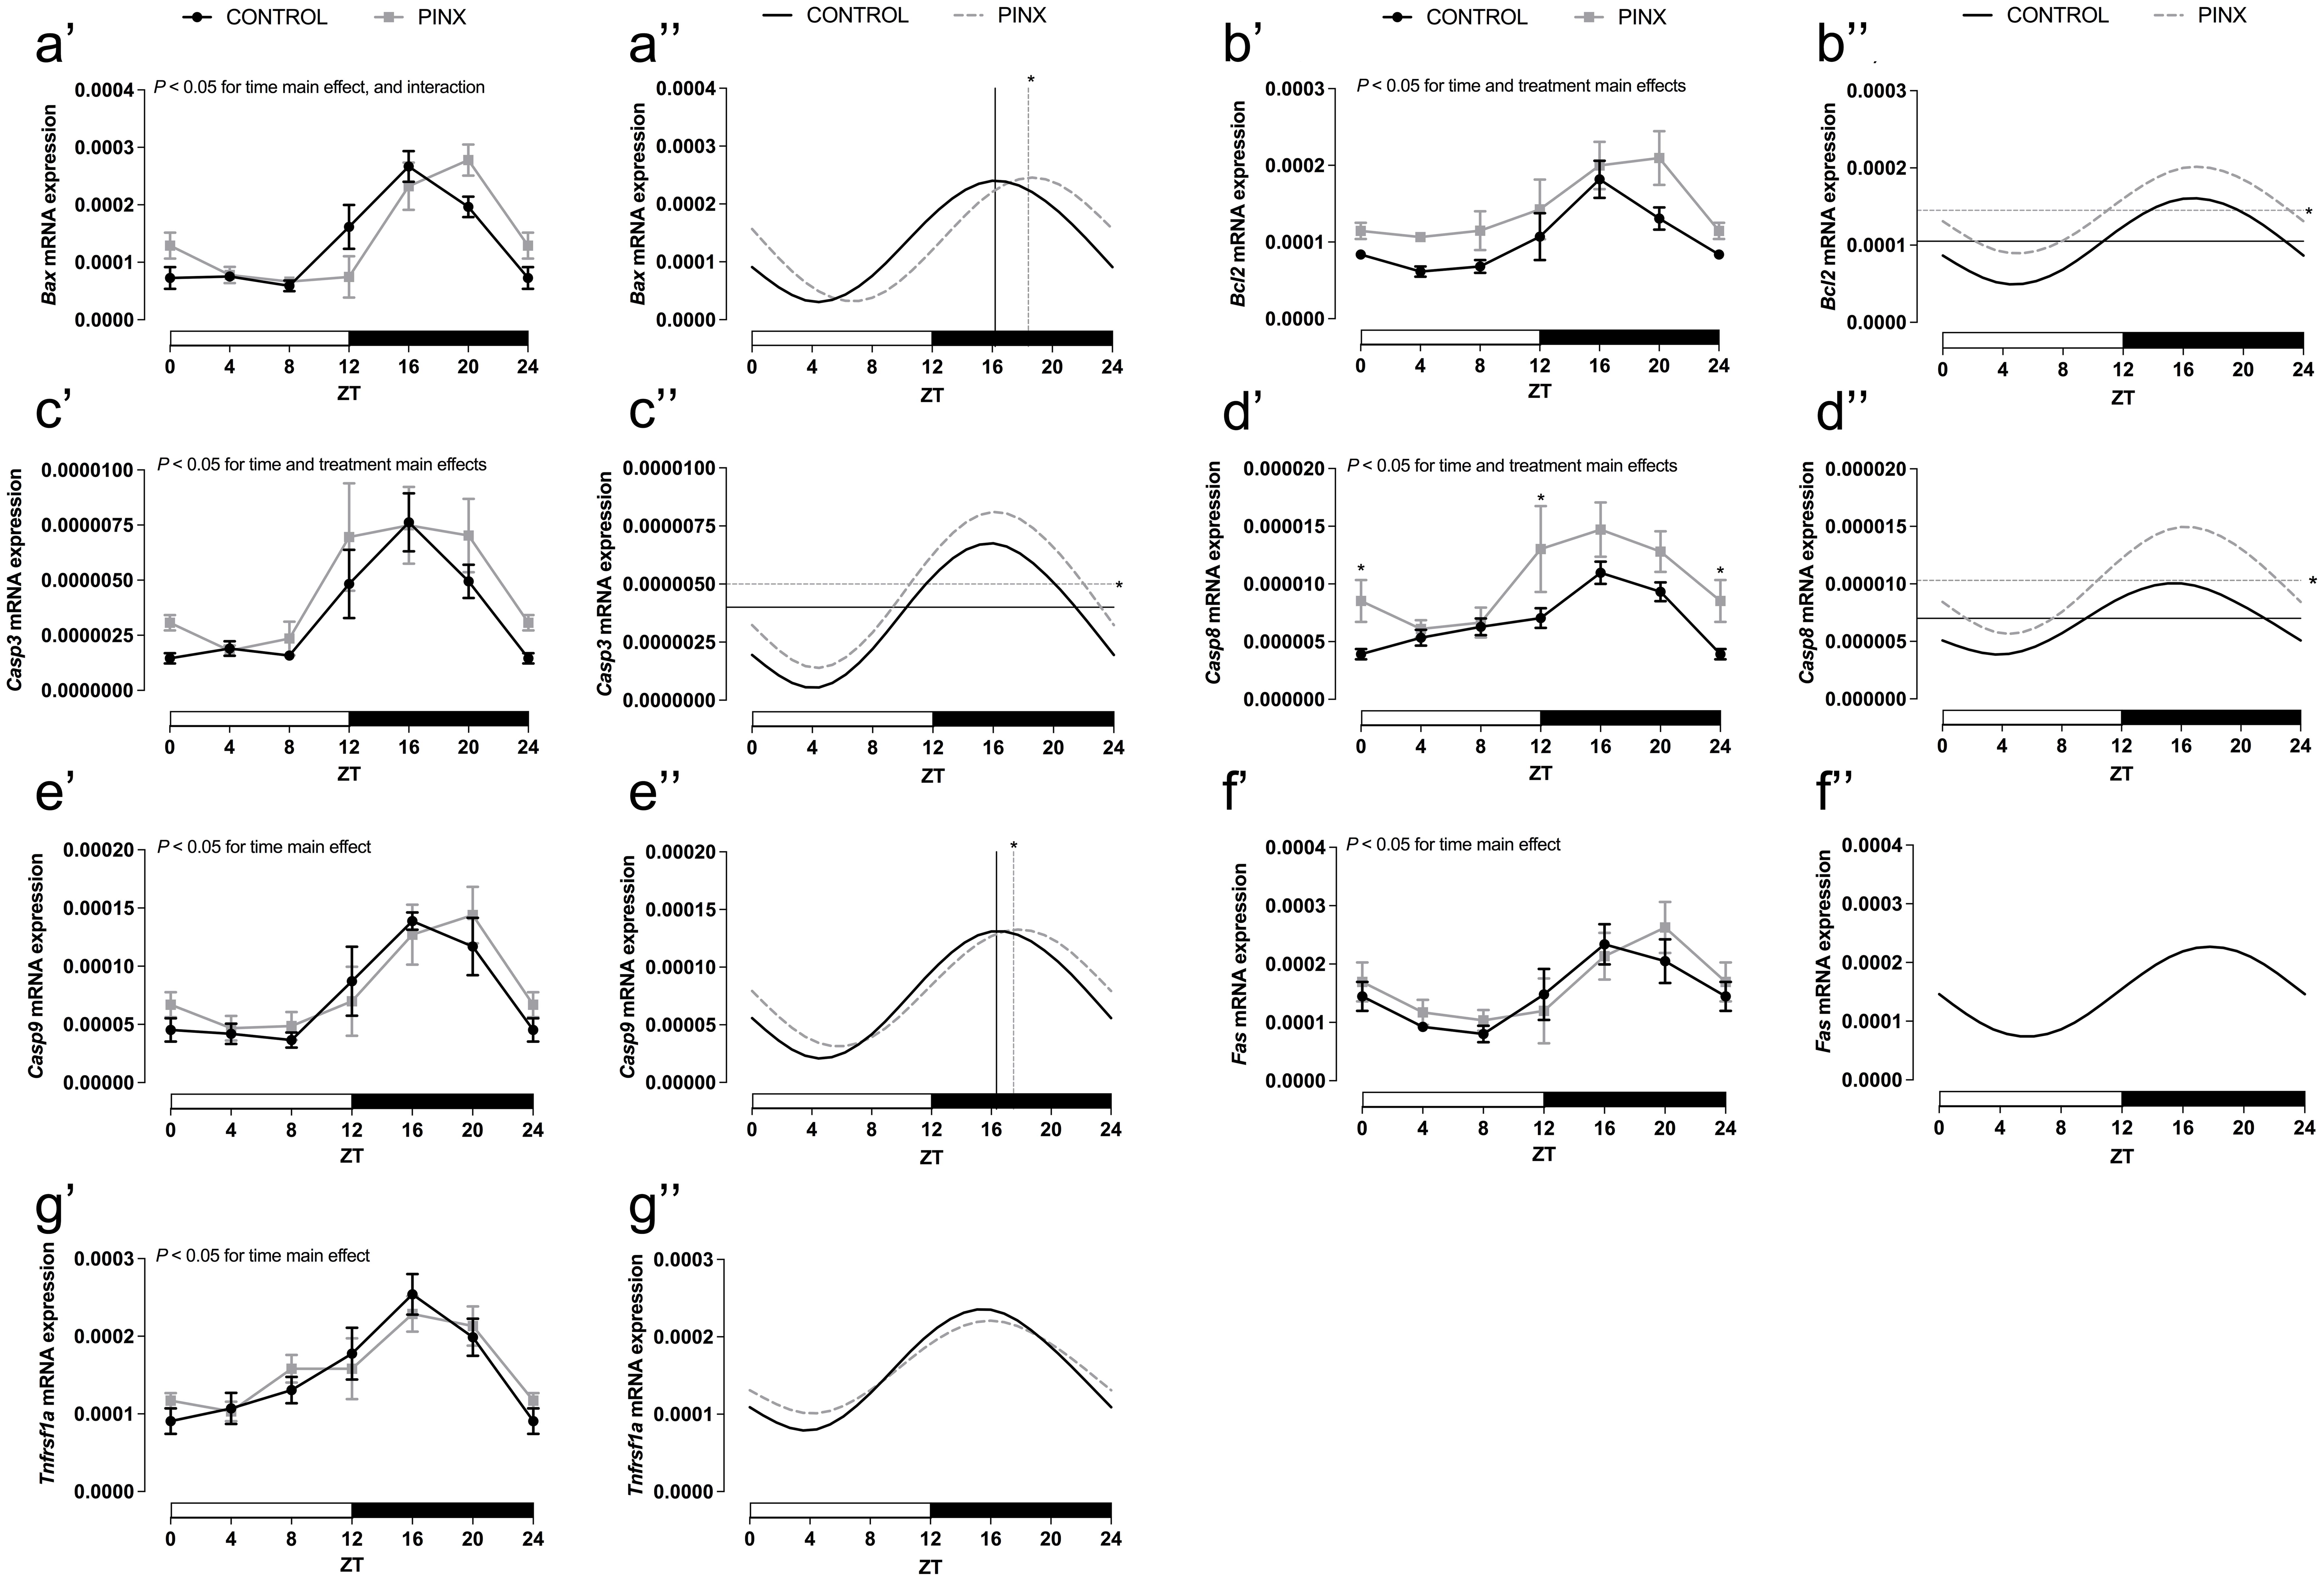 Effects of pinealectomy in the mRNA expression of apoptosis-related genes in rat retroperitoneal adipose tissue (RP).